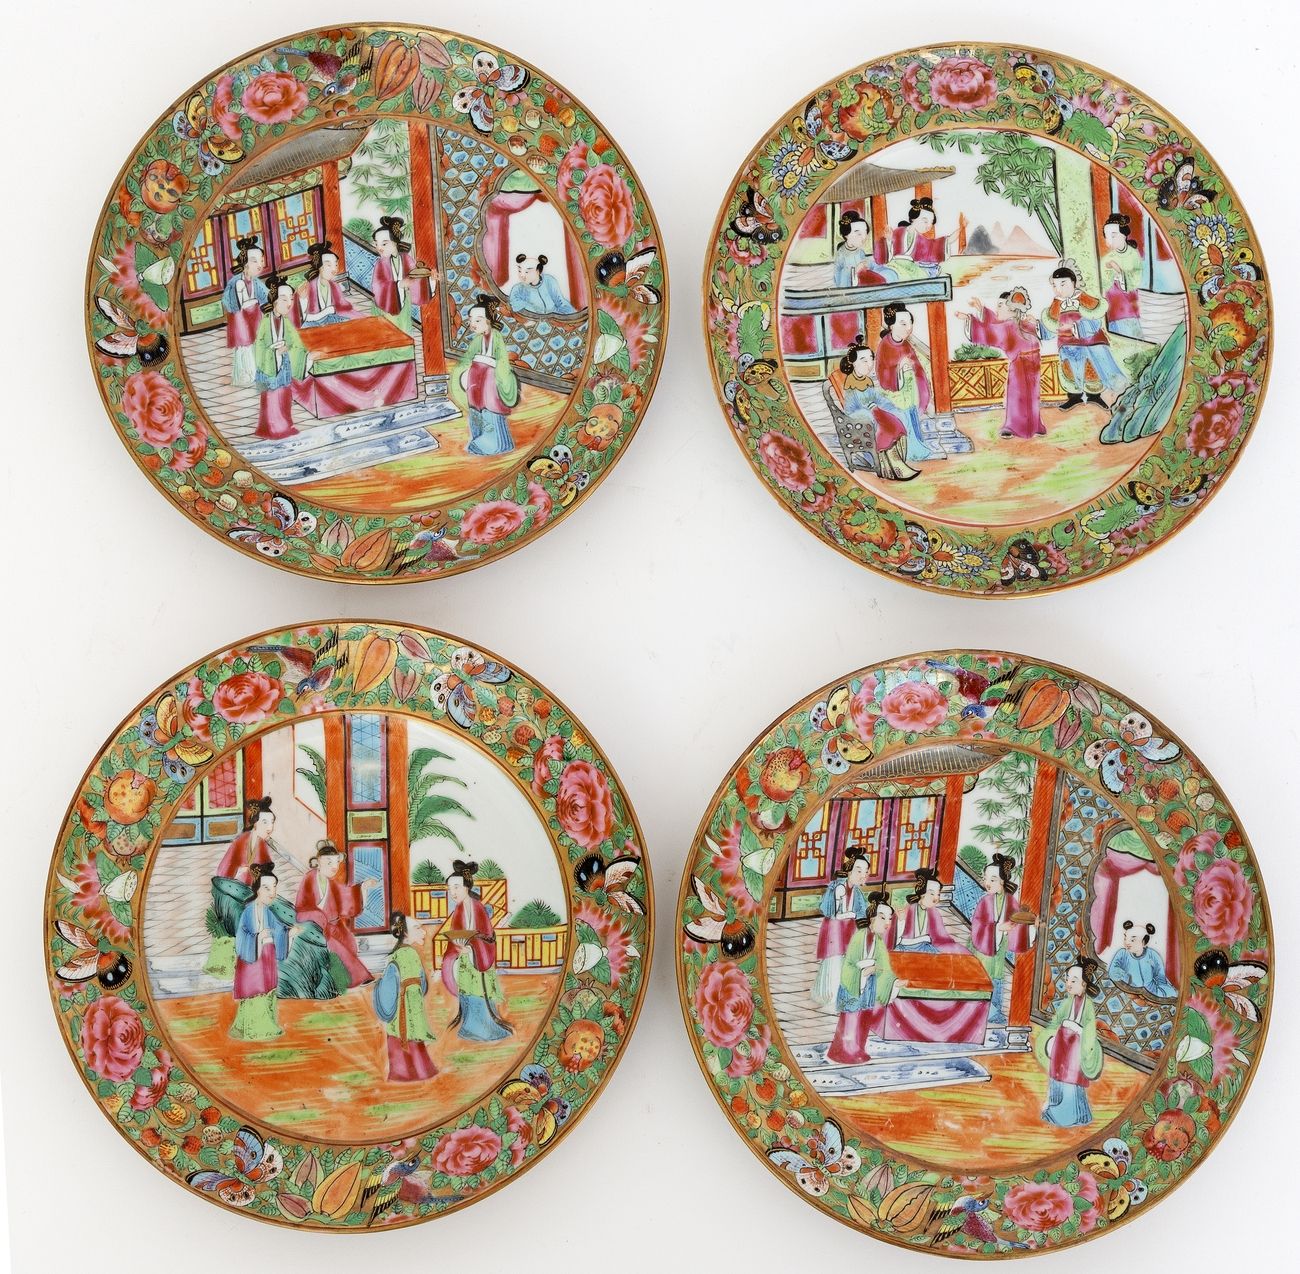 Null China, 19th century
Series of four plates in Canton porcelain decorated wit&hellip;